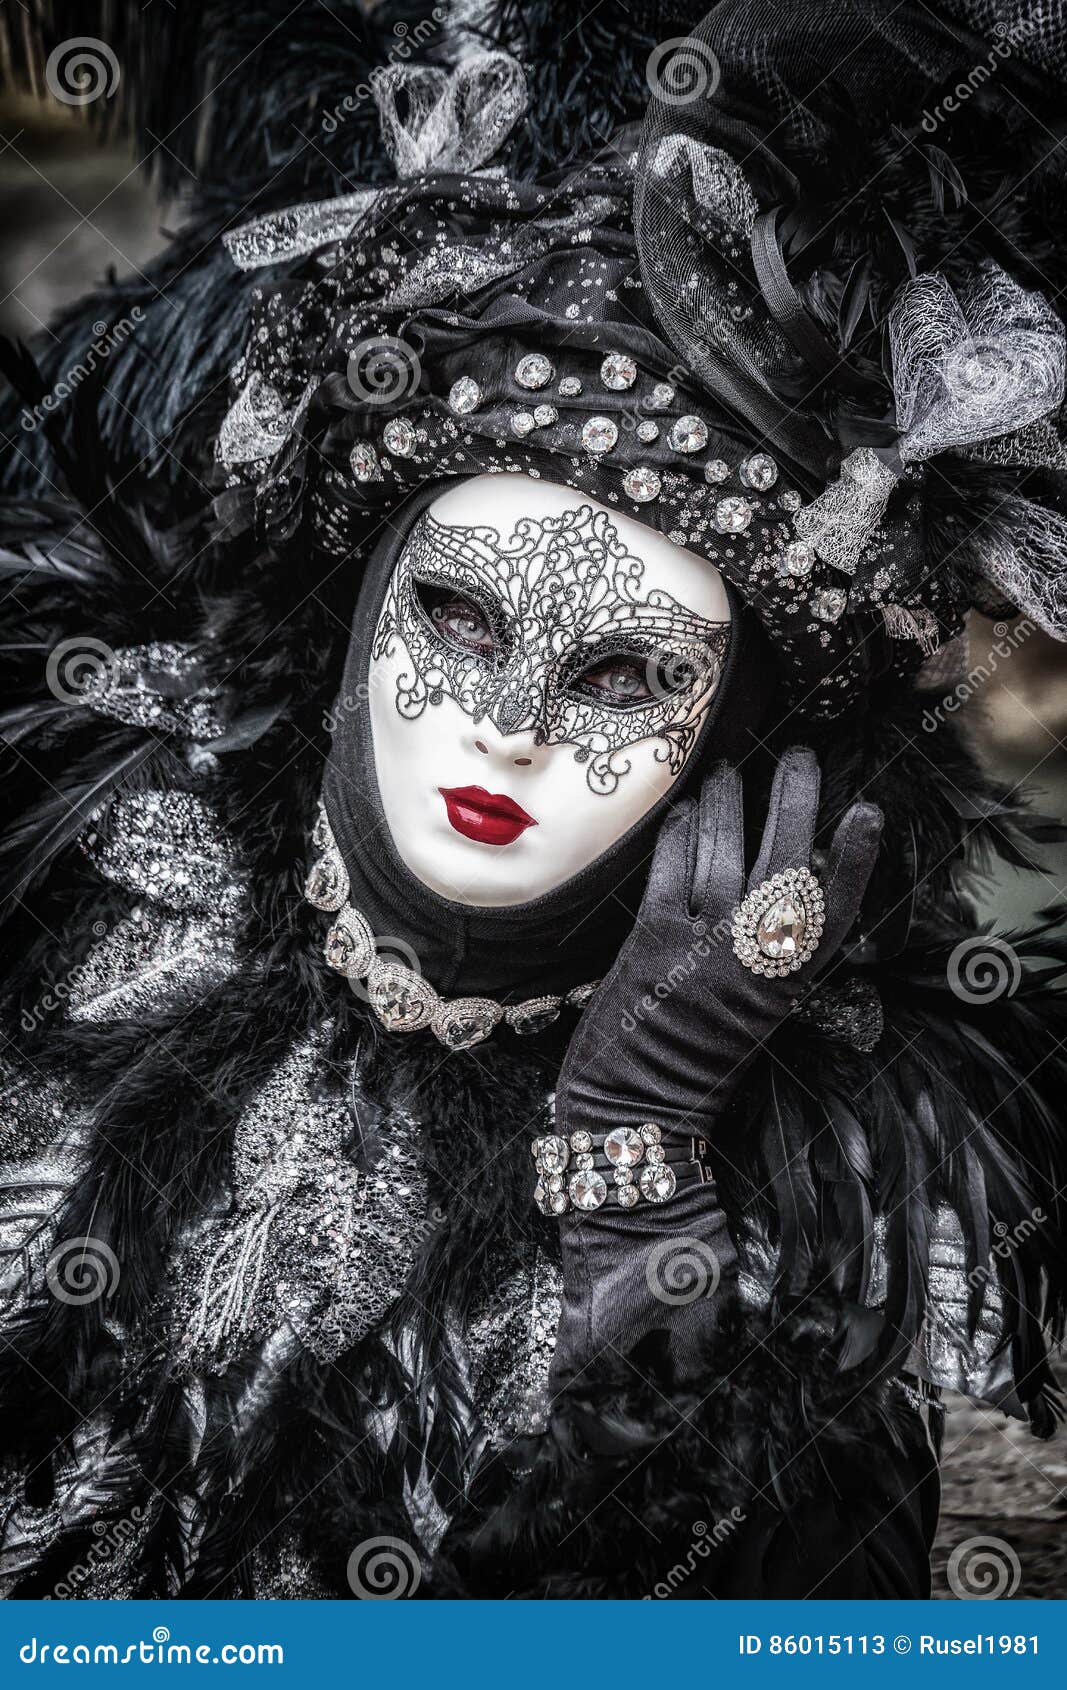 Glowing Black Carnaval Mask Editorial Stock Photo - Image of female ...